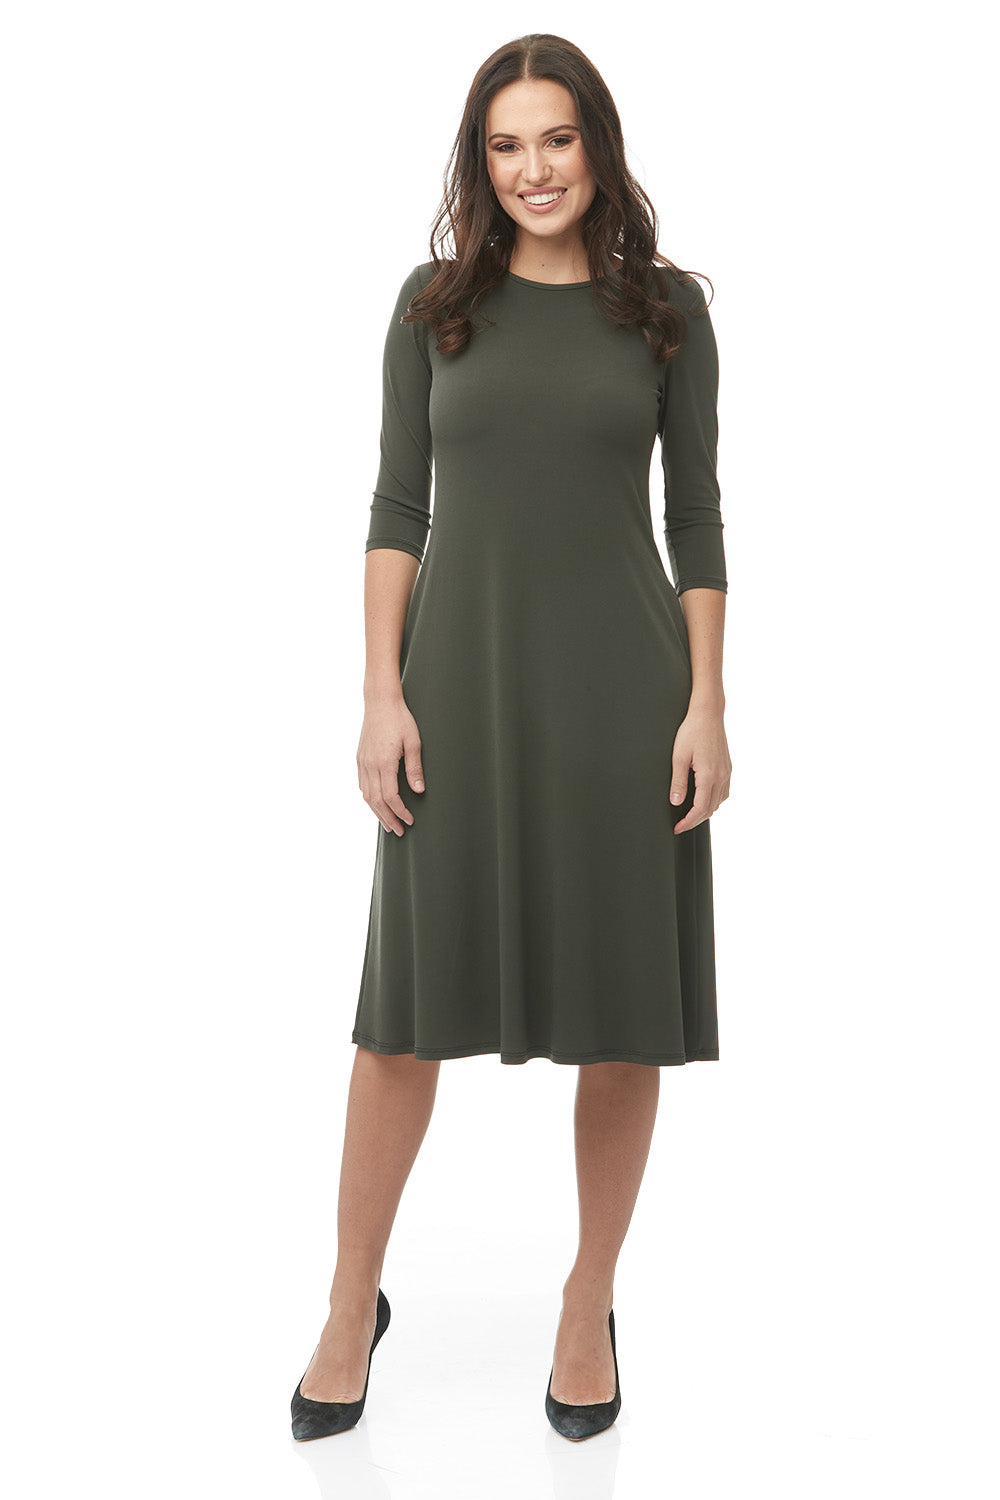 Esteez TAMMEE Dress - Womens Classic Fit and Flare Dress with pockets - GREEN